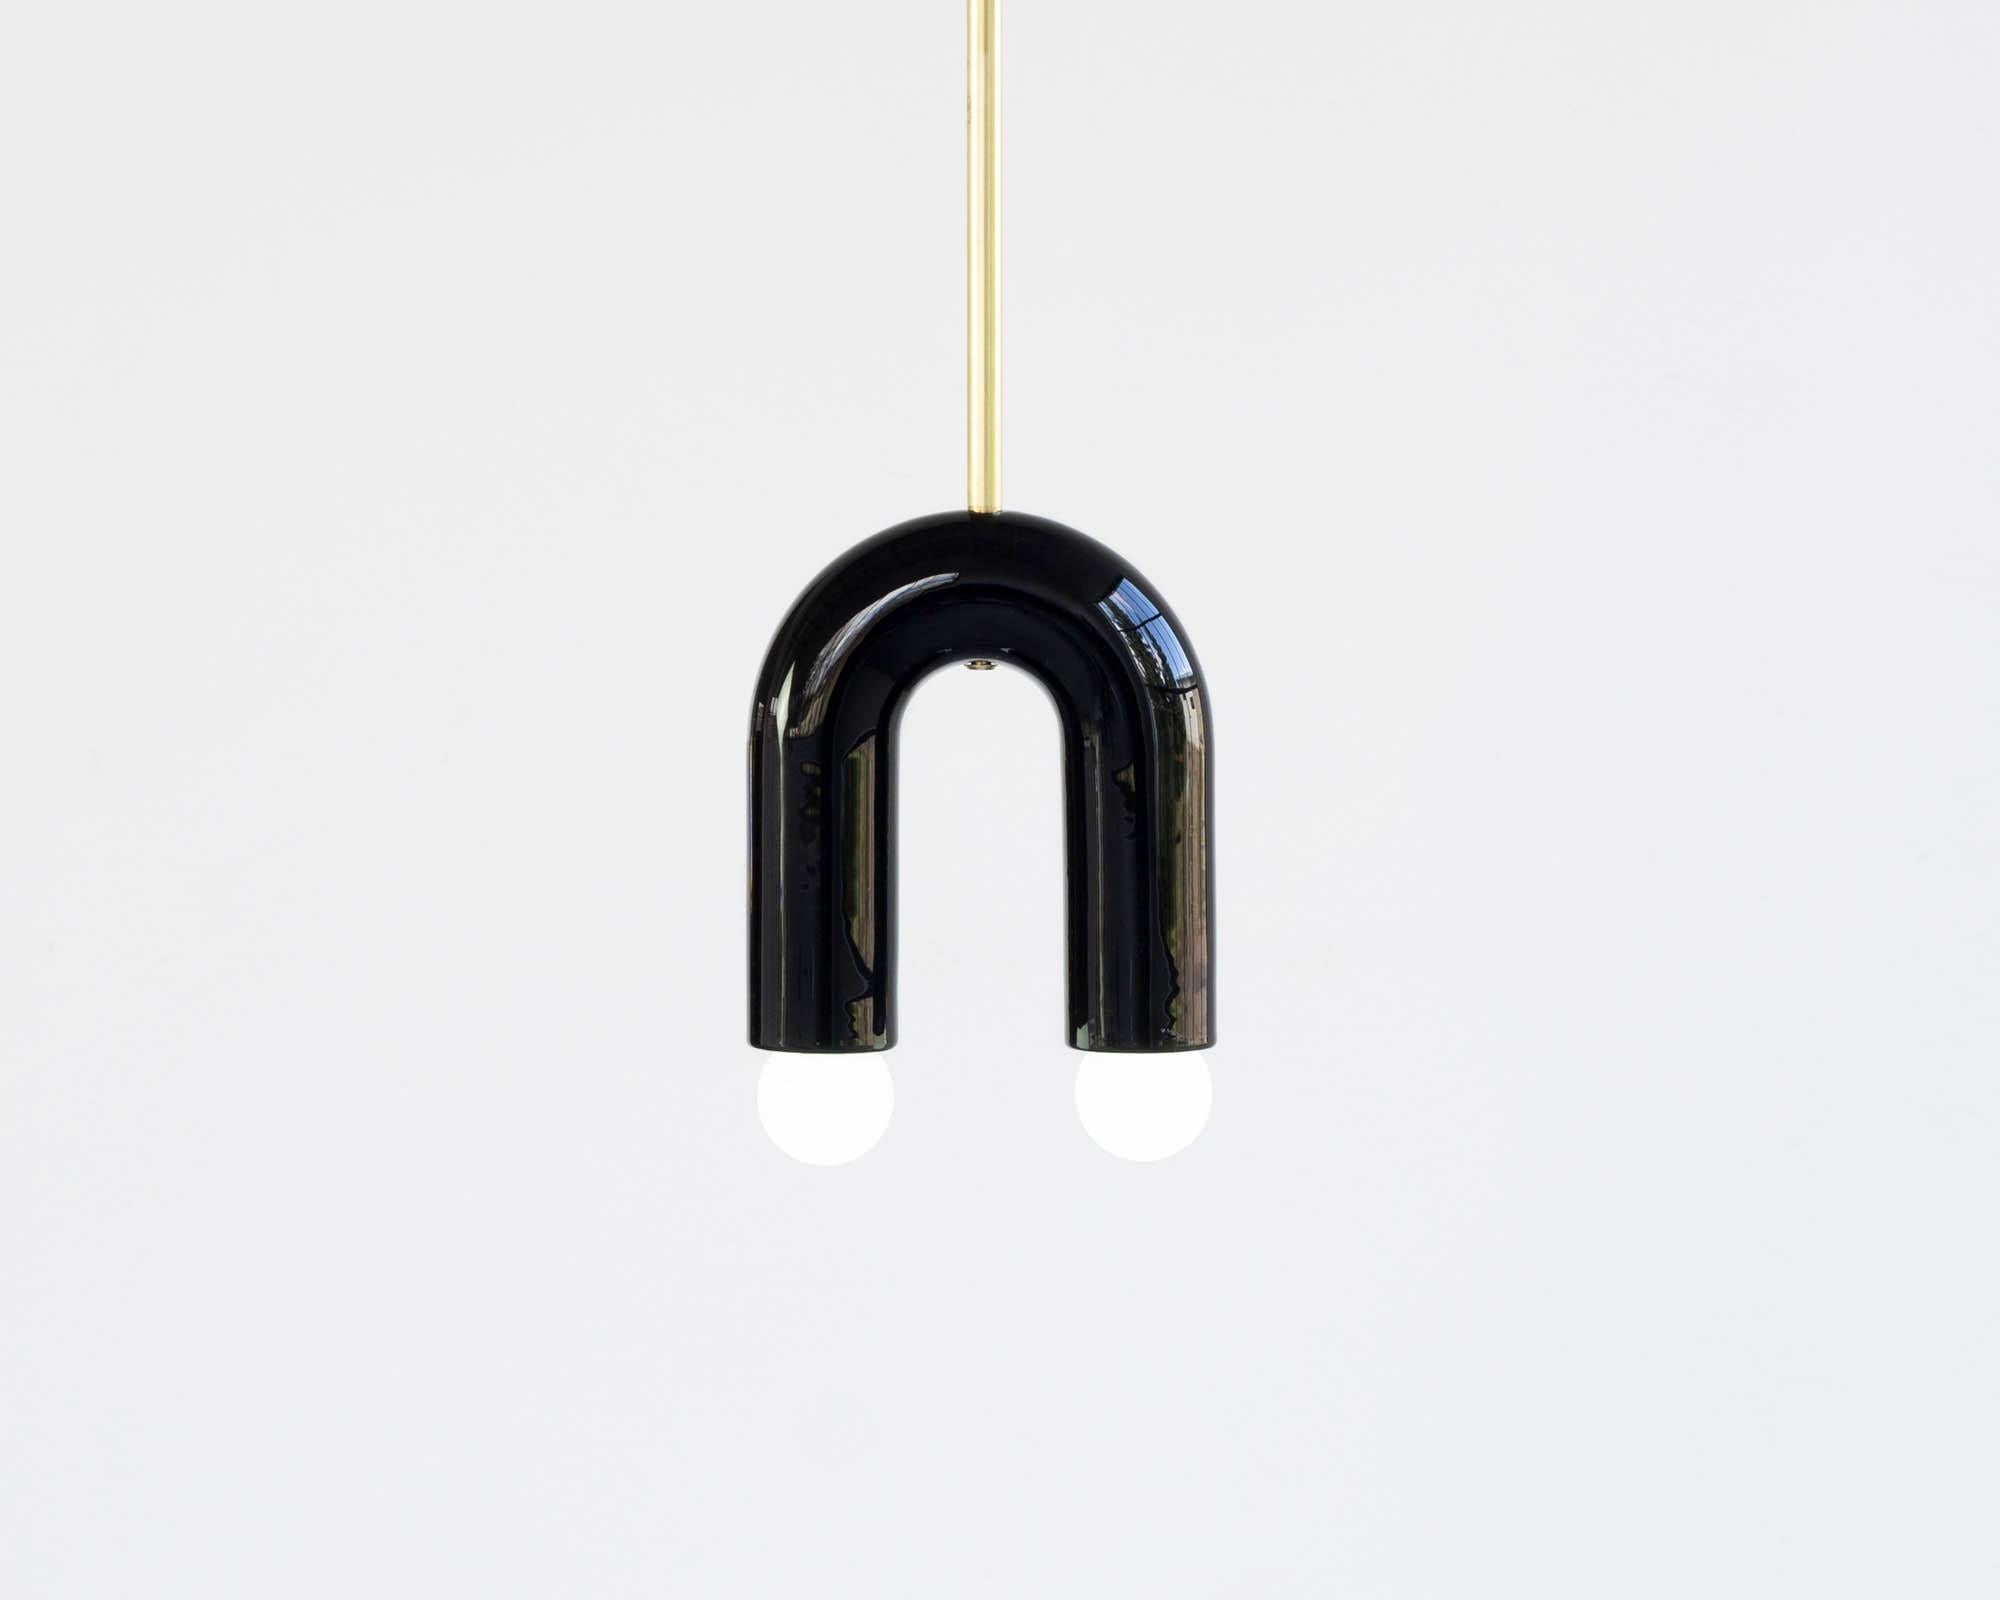 TRN A1 Pendant lamp / ceiling lamp / chandelier
Designer: Pani Jurek

Dimensions: H 17.5 x 15 x 5 cm
Model shown: Yellow

Bulb (not included): E27/E26, compatible with US electric system

Materials: Hand glazed ceramic and brass
Rod: brass, length